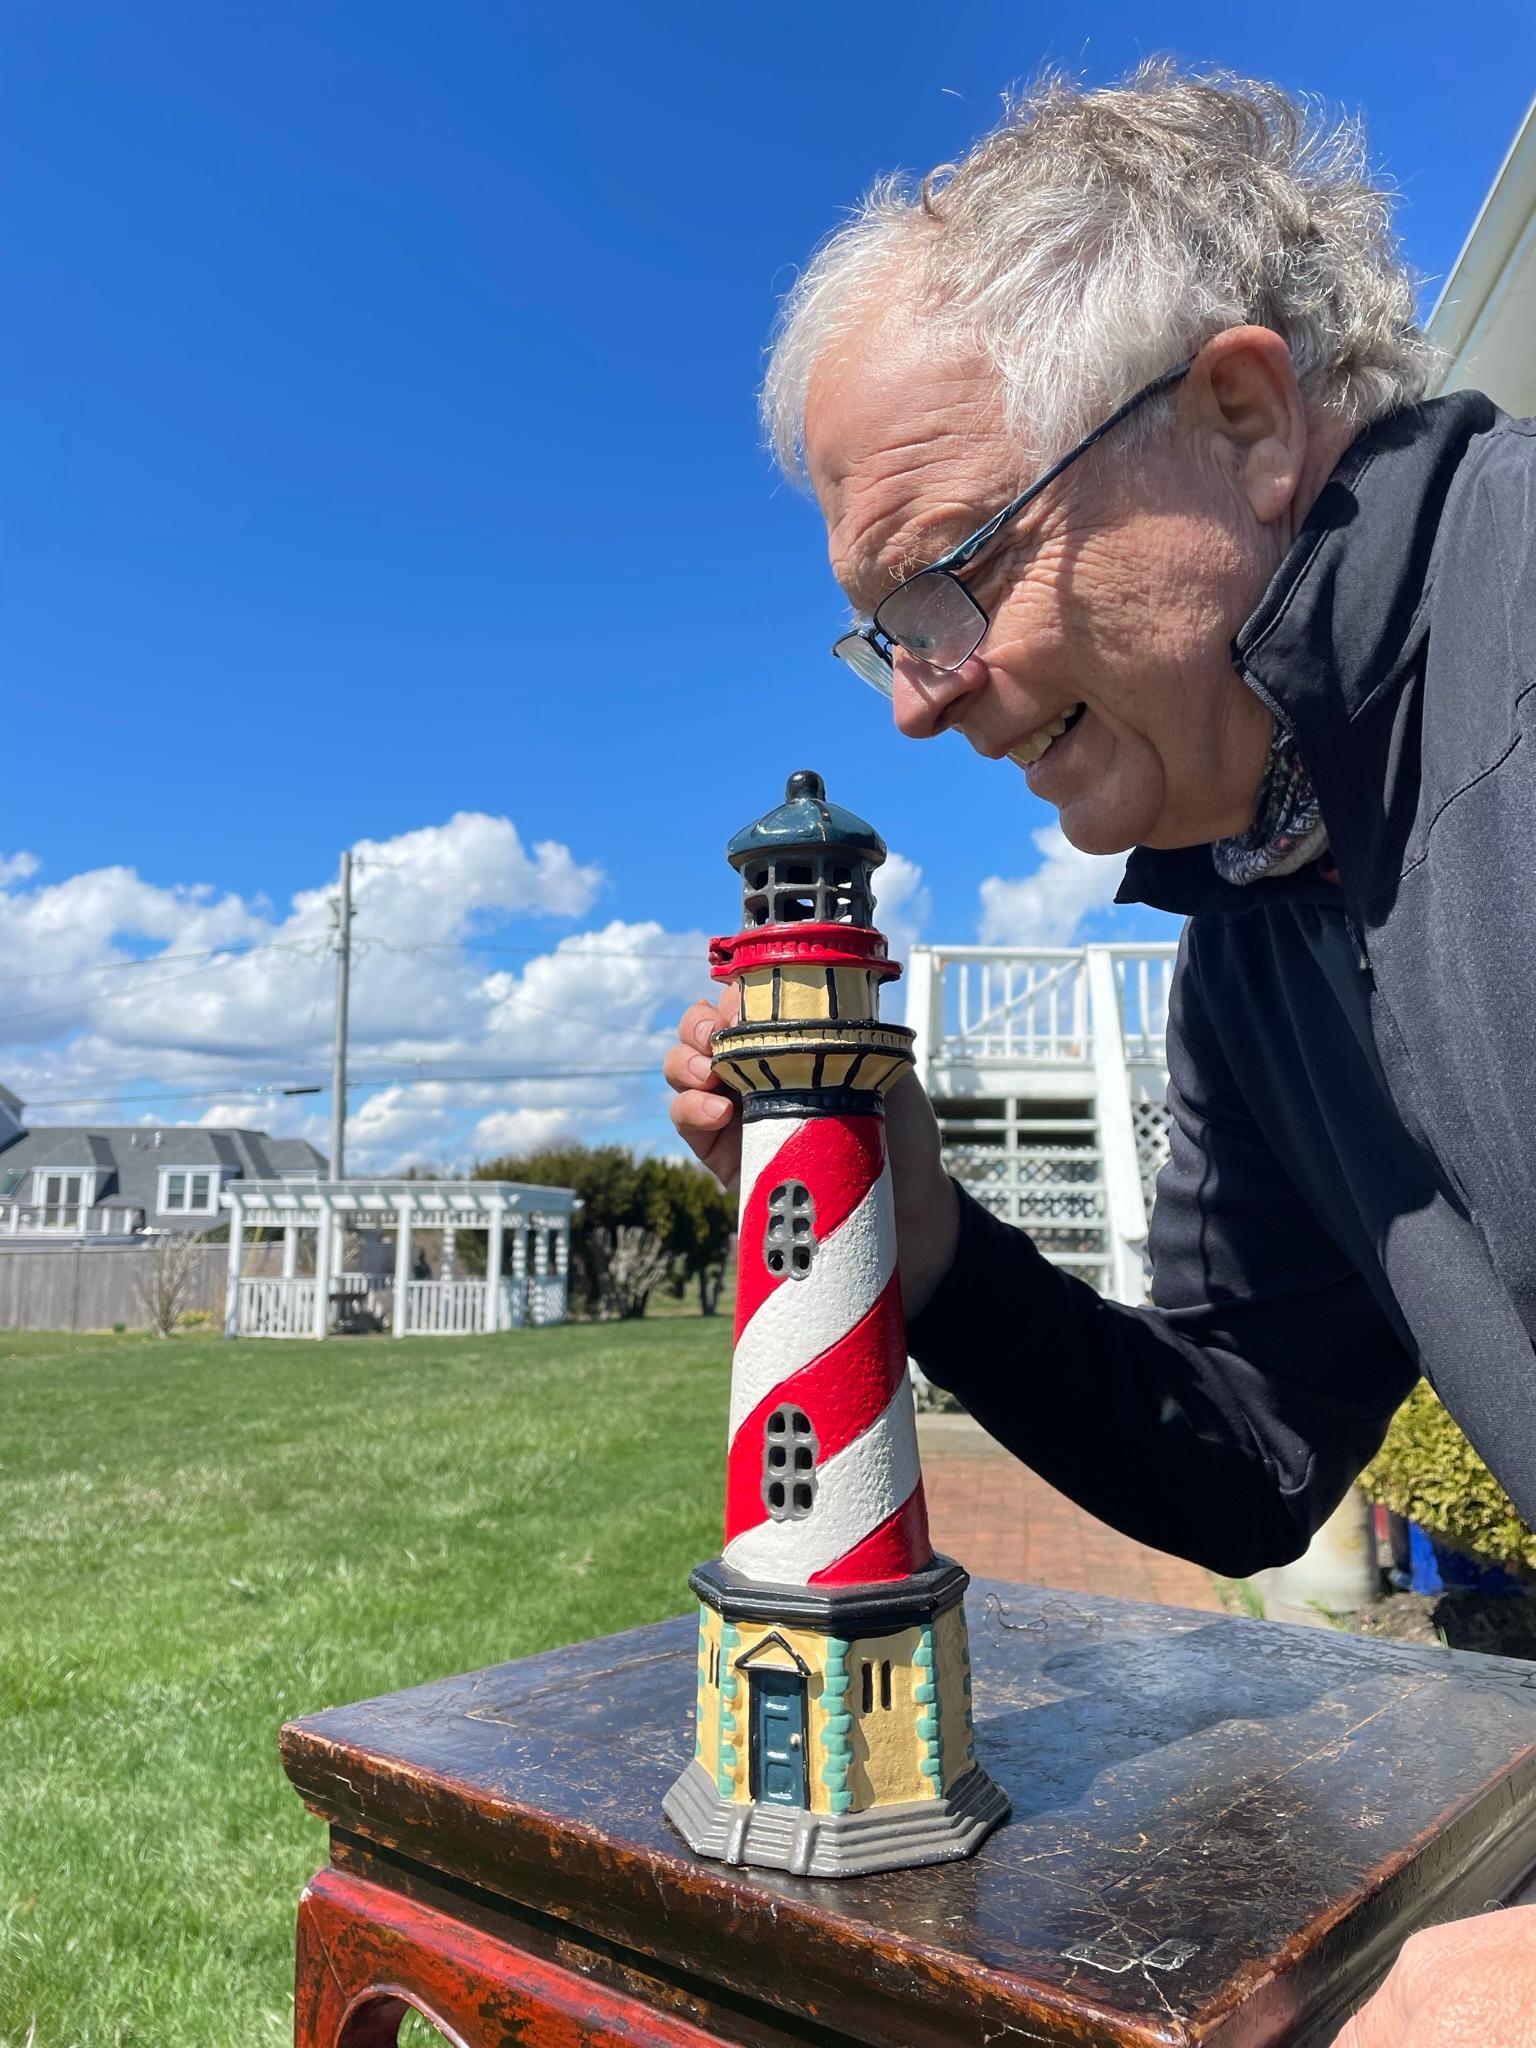 SEE THIS AND OUR GARDEN ART EXHIBITION IN NEWPORT, RHODE ISLAND UNTIL OCTOBER 10, 2022

Light house lovers delight.

Original hand painted colors of red, white, and blue

This unusual 